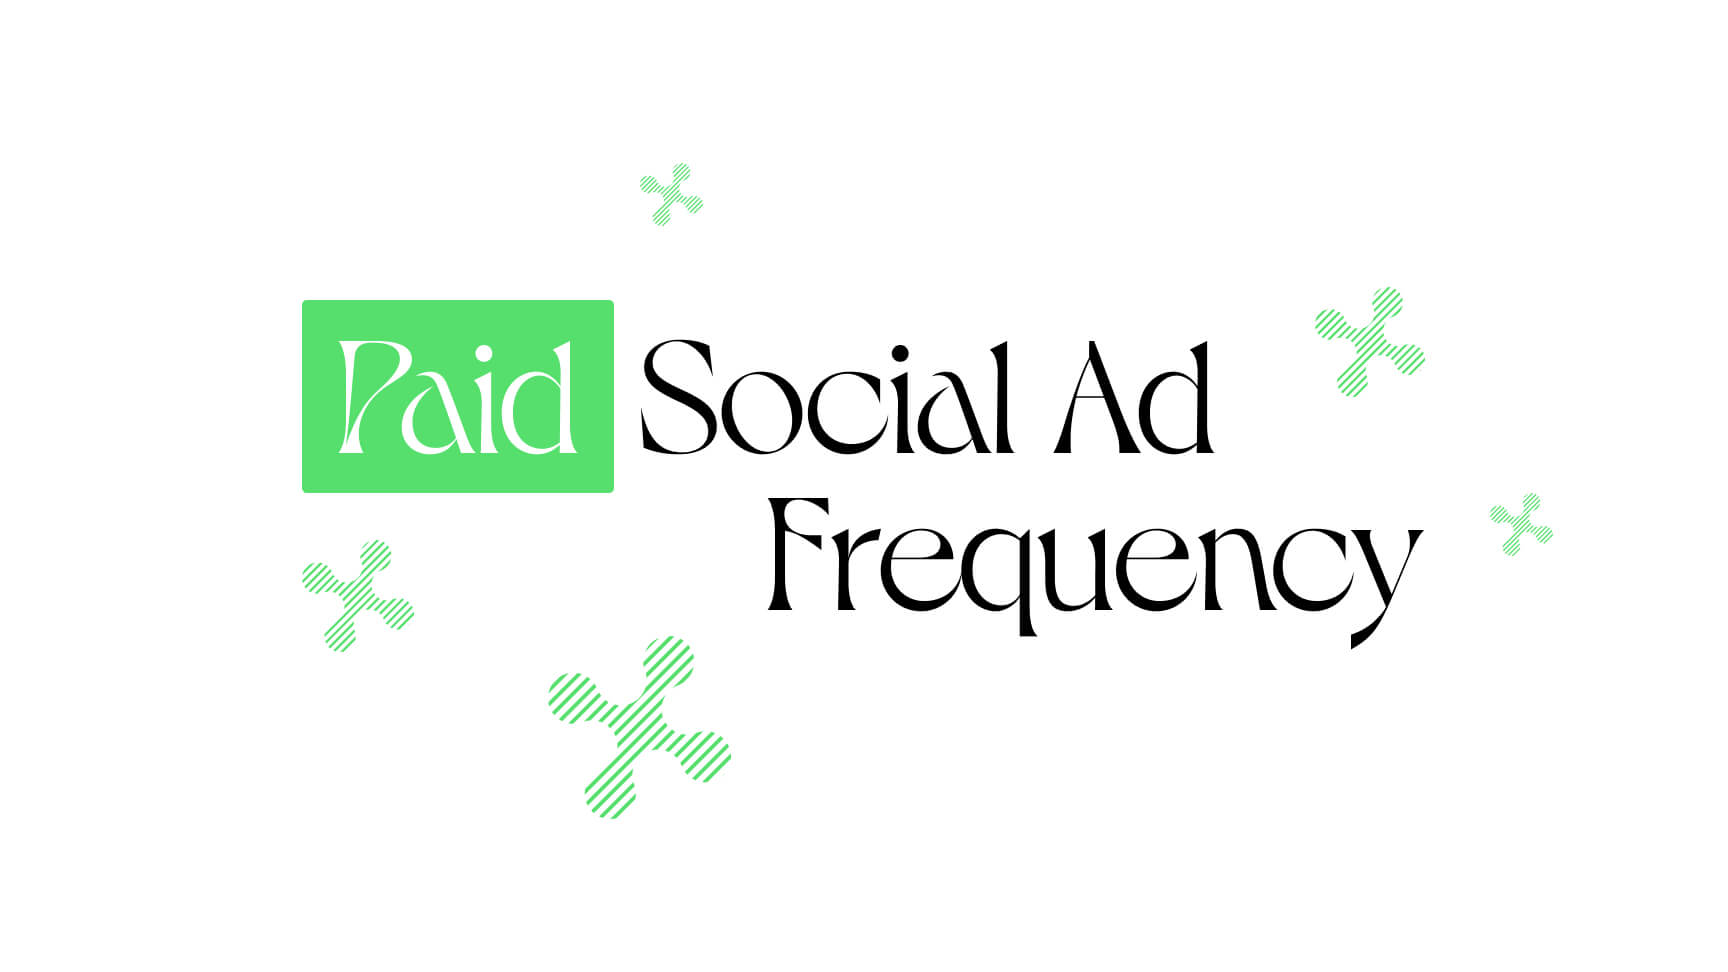 Paid Social Ad Frequency